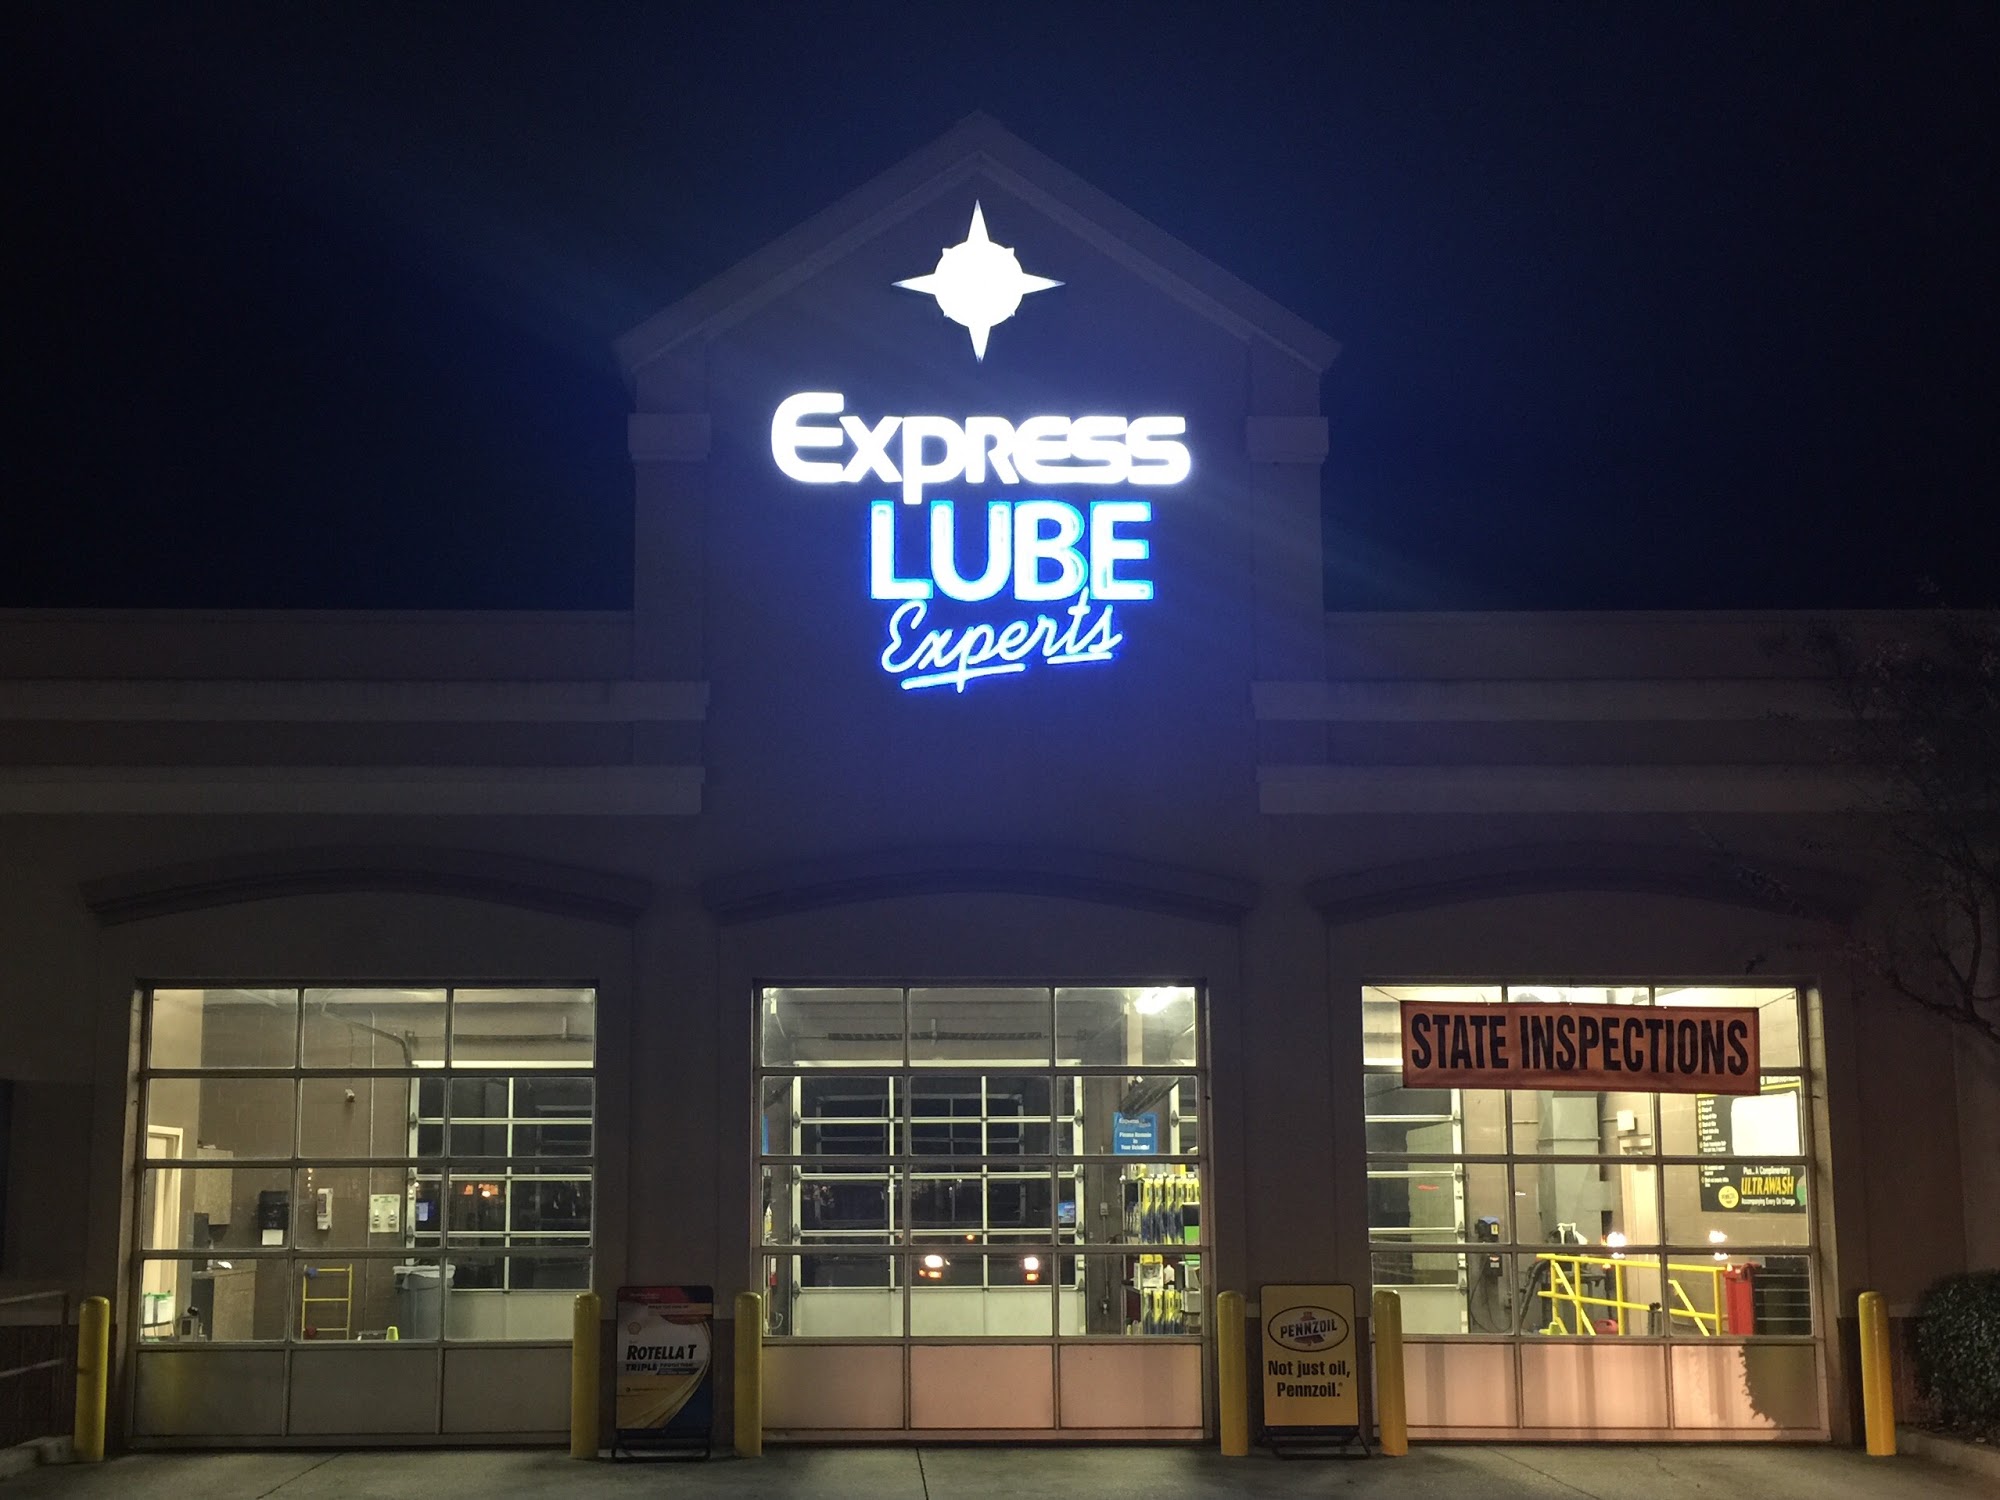 Express Lube Experts